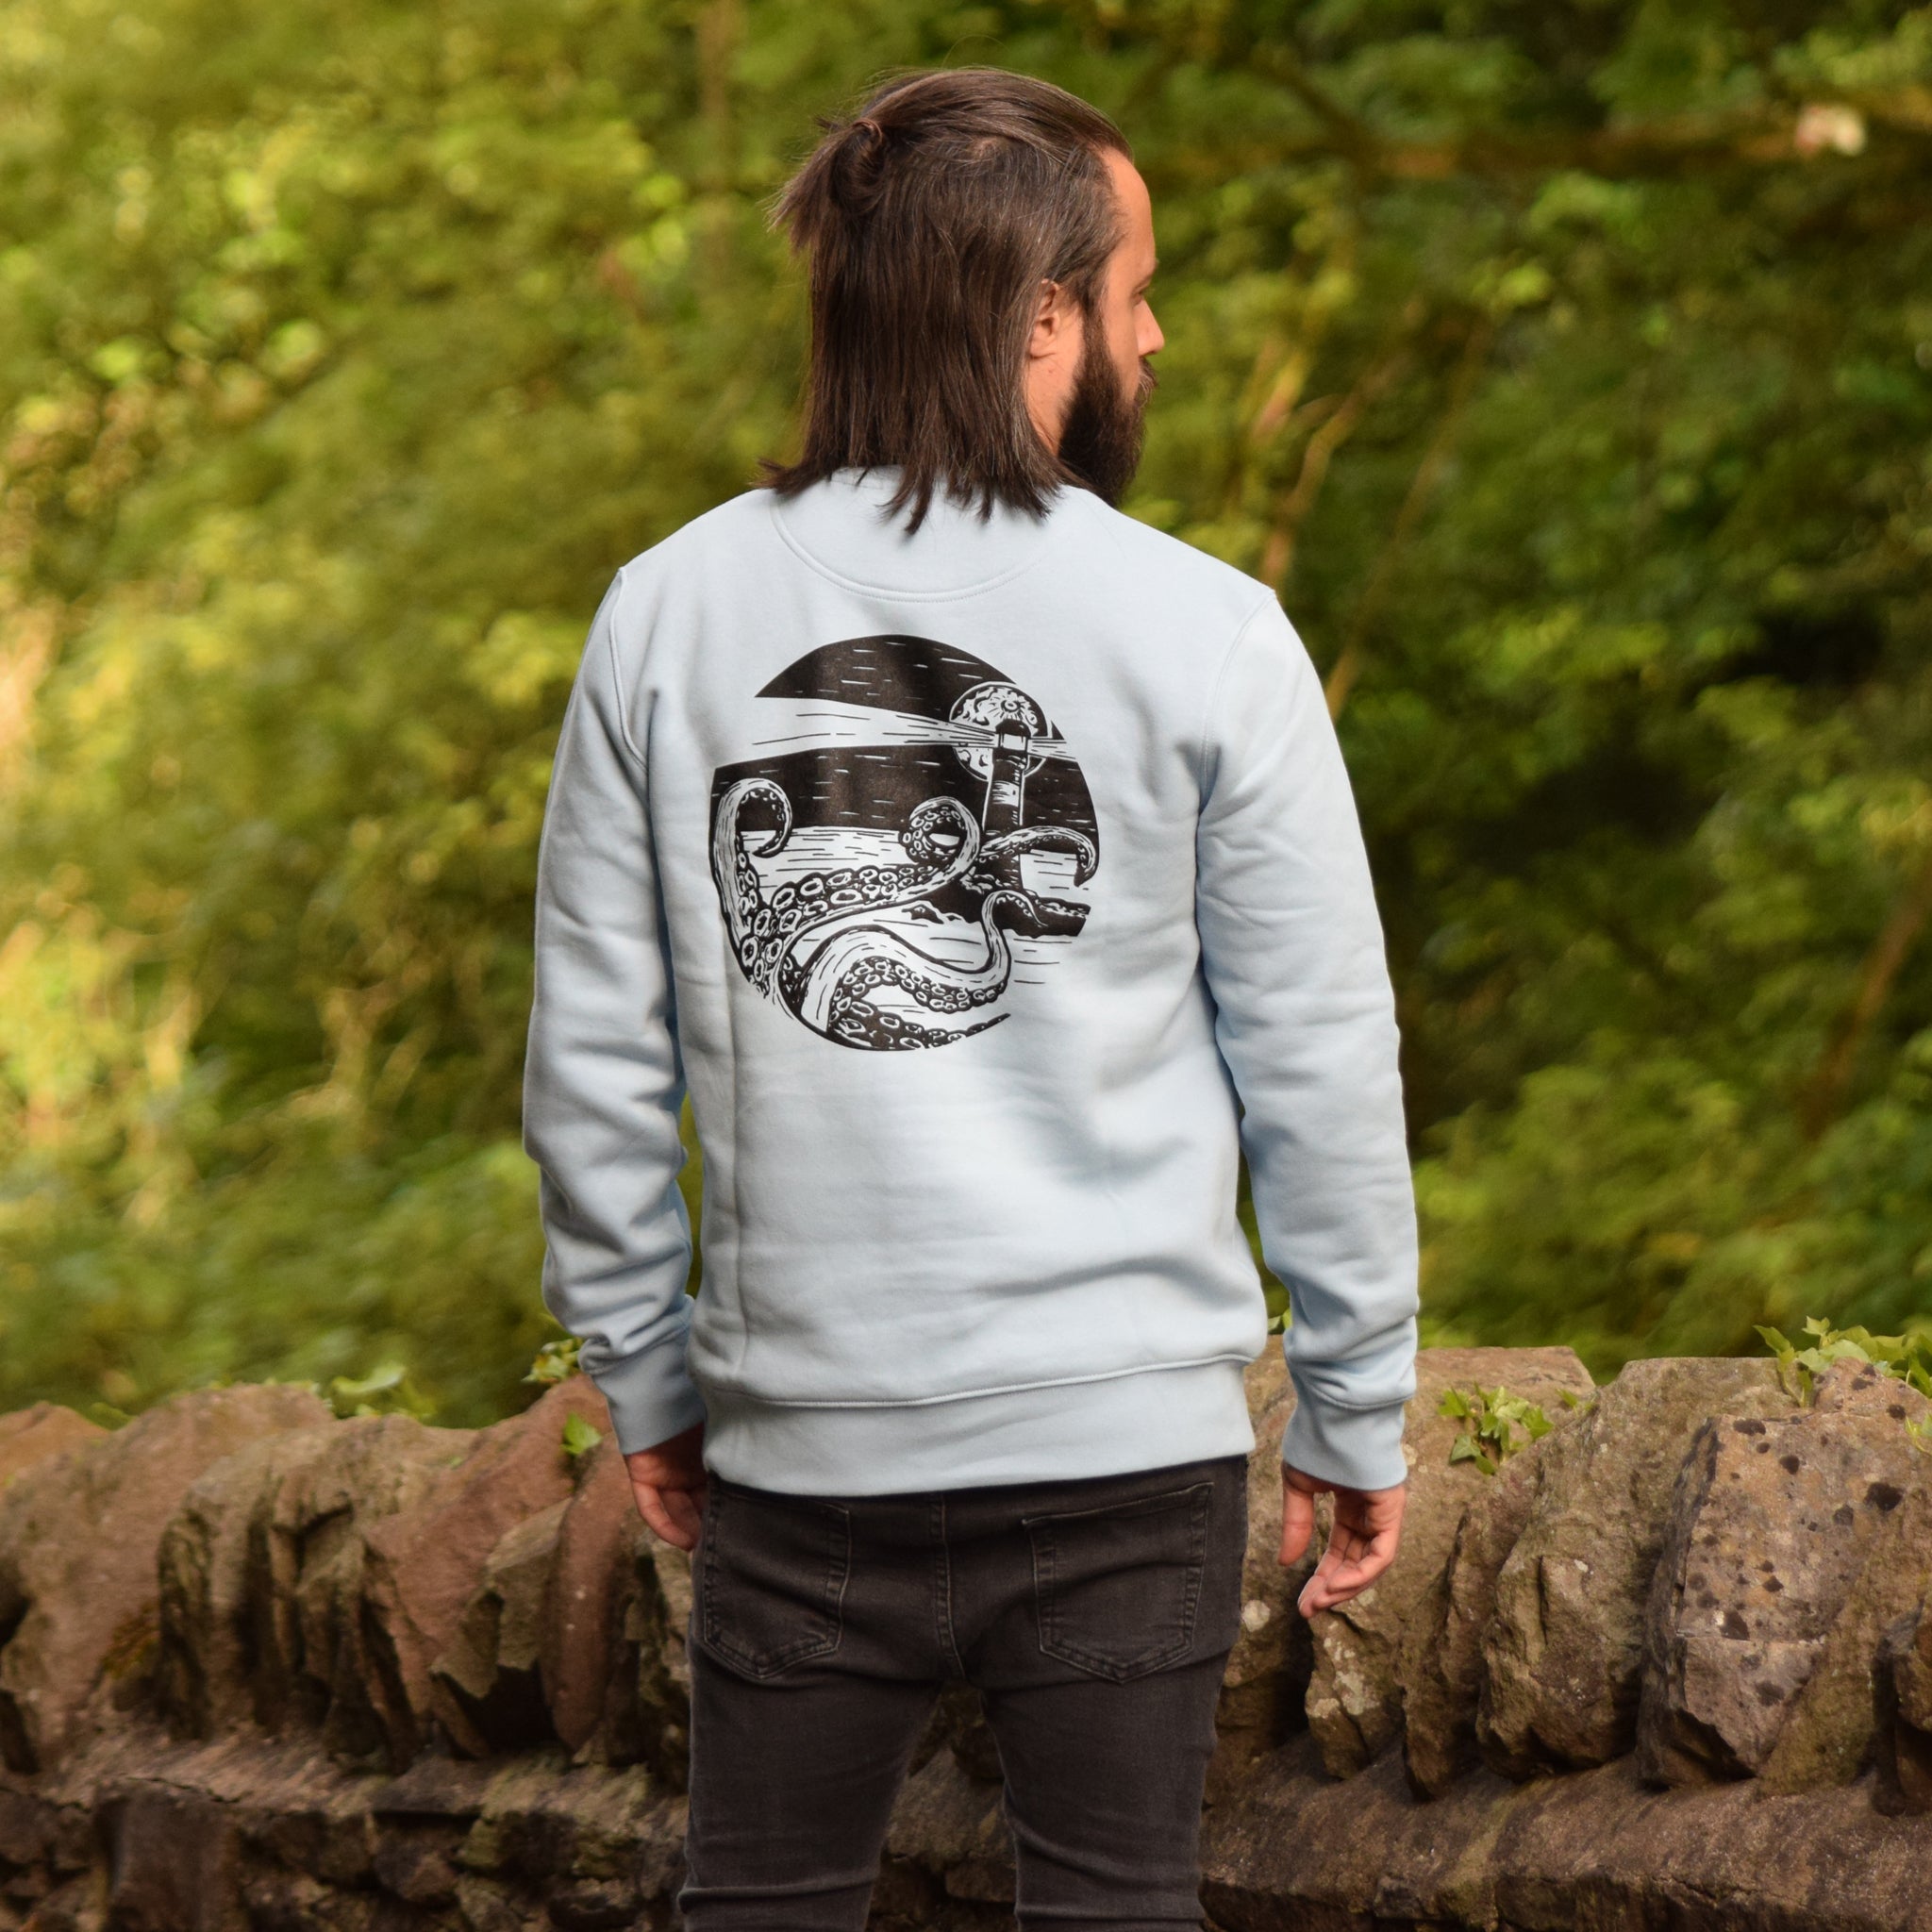 'From the Deep' Unisex Sweatshirts (Outlet)